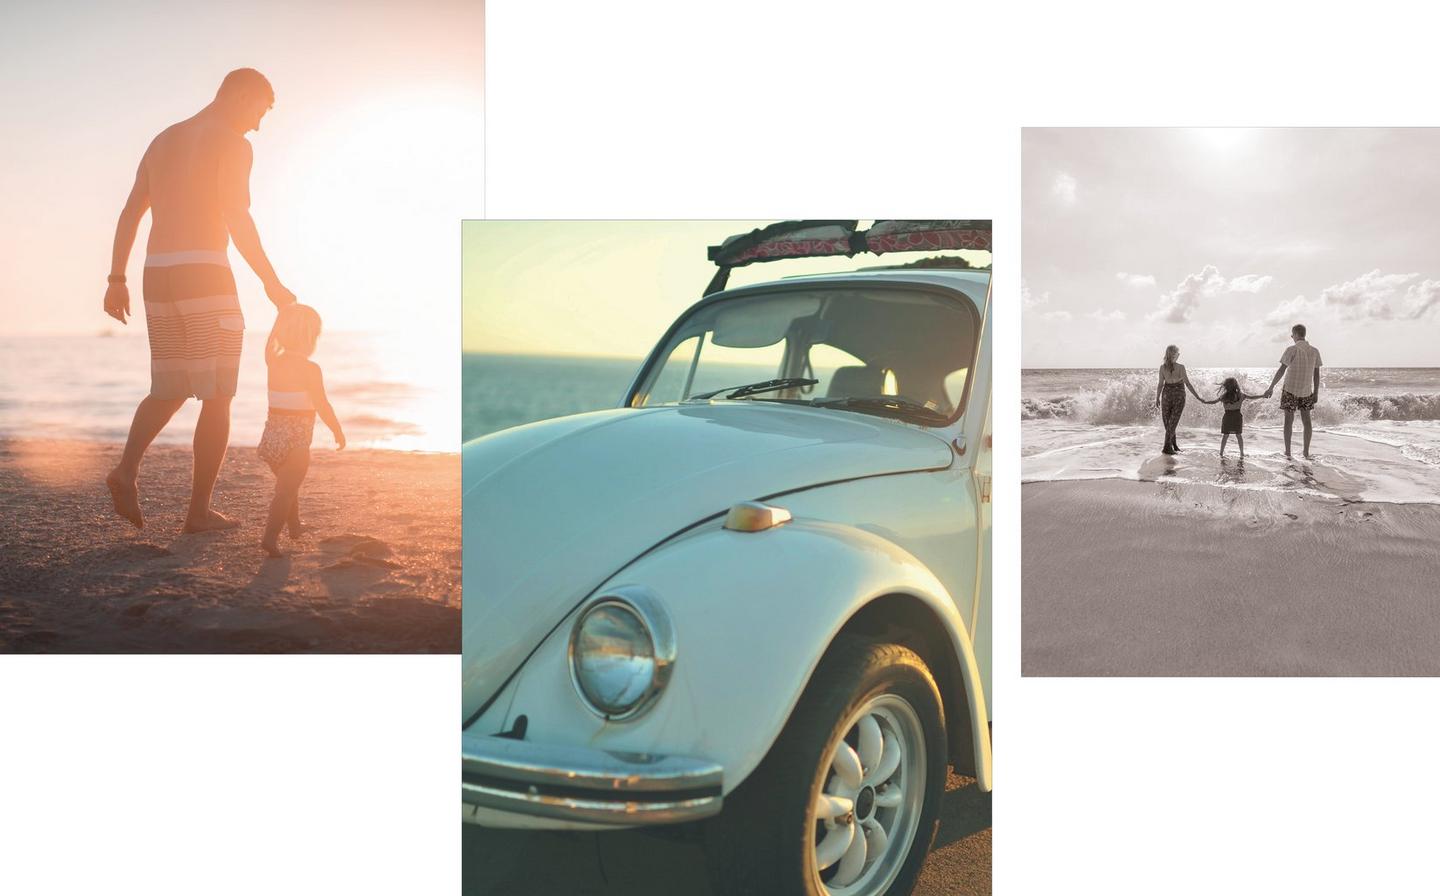 Families walking on the beach and a Volkswagen beetle